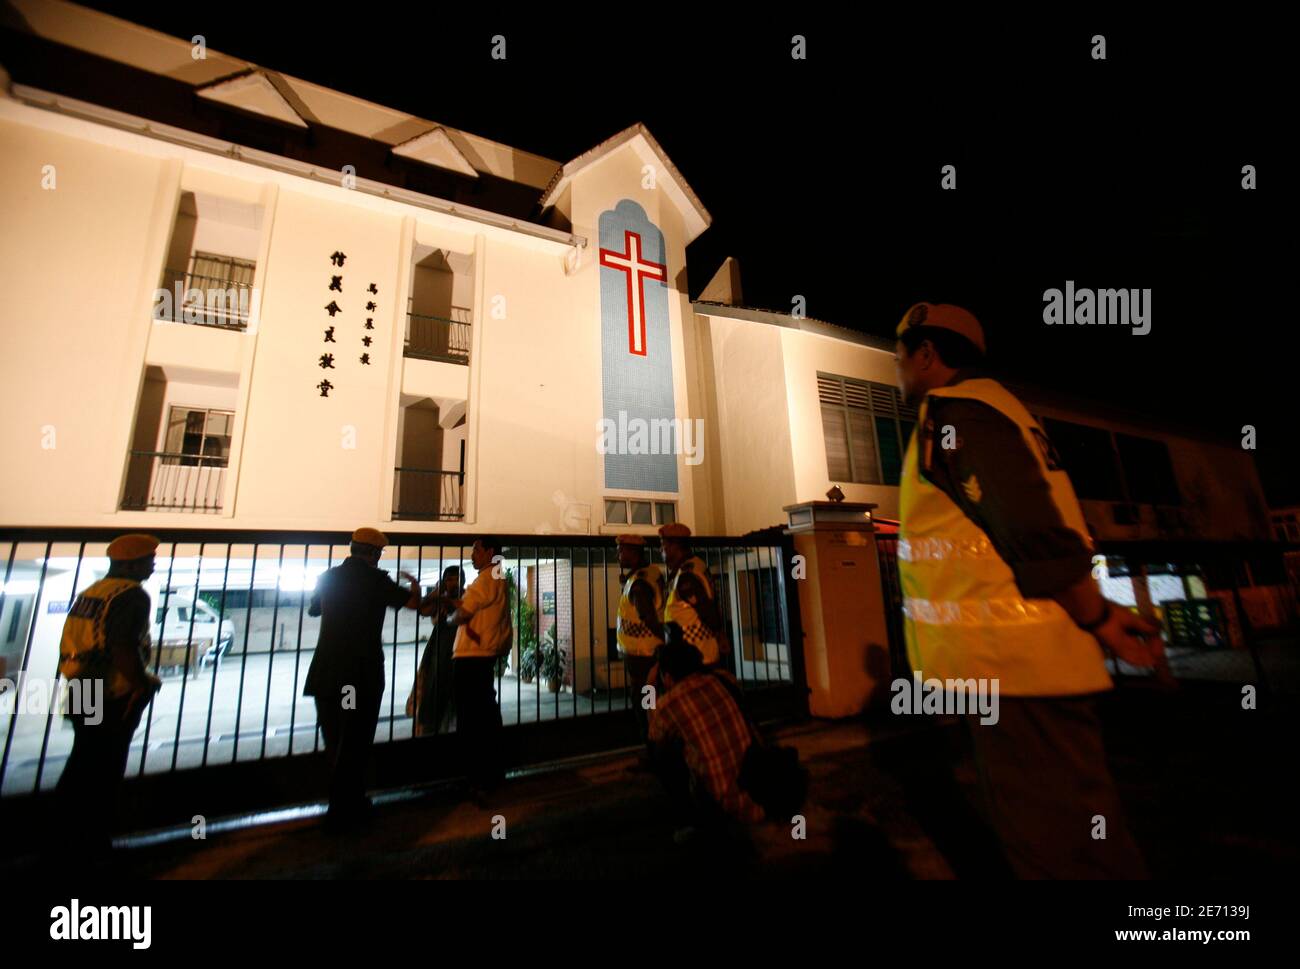 Members of the Volunteers of Malaysian People talk to the security guard of the attacked Good Shepherd Lutheran Church in Petaling Jaya outside Kuala Lumpur early January 13, 2010. Arsonists in Malaysia struck at nine churches and a convent school since Friday amid rising tensions between majority Muslims and Christians over the use of the word 'Allah' to describe the Christian God. The row, over a court ruling that allowed a Catholic newspaper to use Allah in its Malay-language editions, prompted Muslims to protest at mosques on Friday and sparked arson attacks on churches. REUTERS/Bazuki Muh Stock Photo